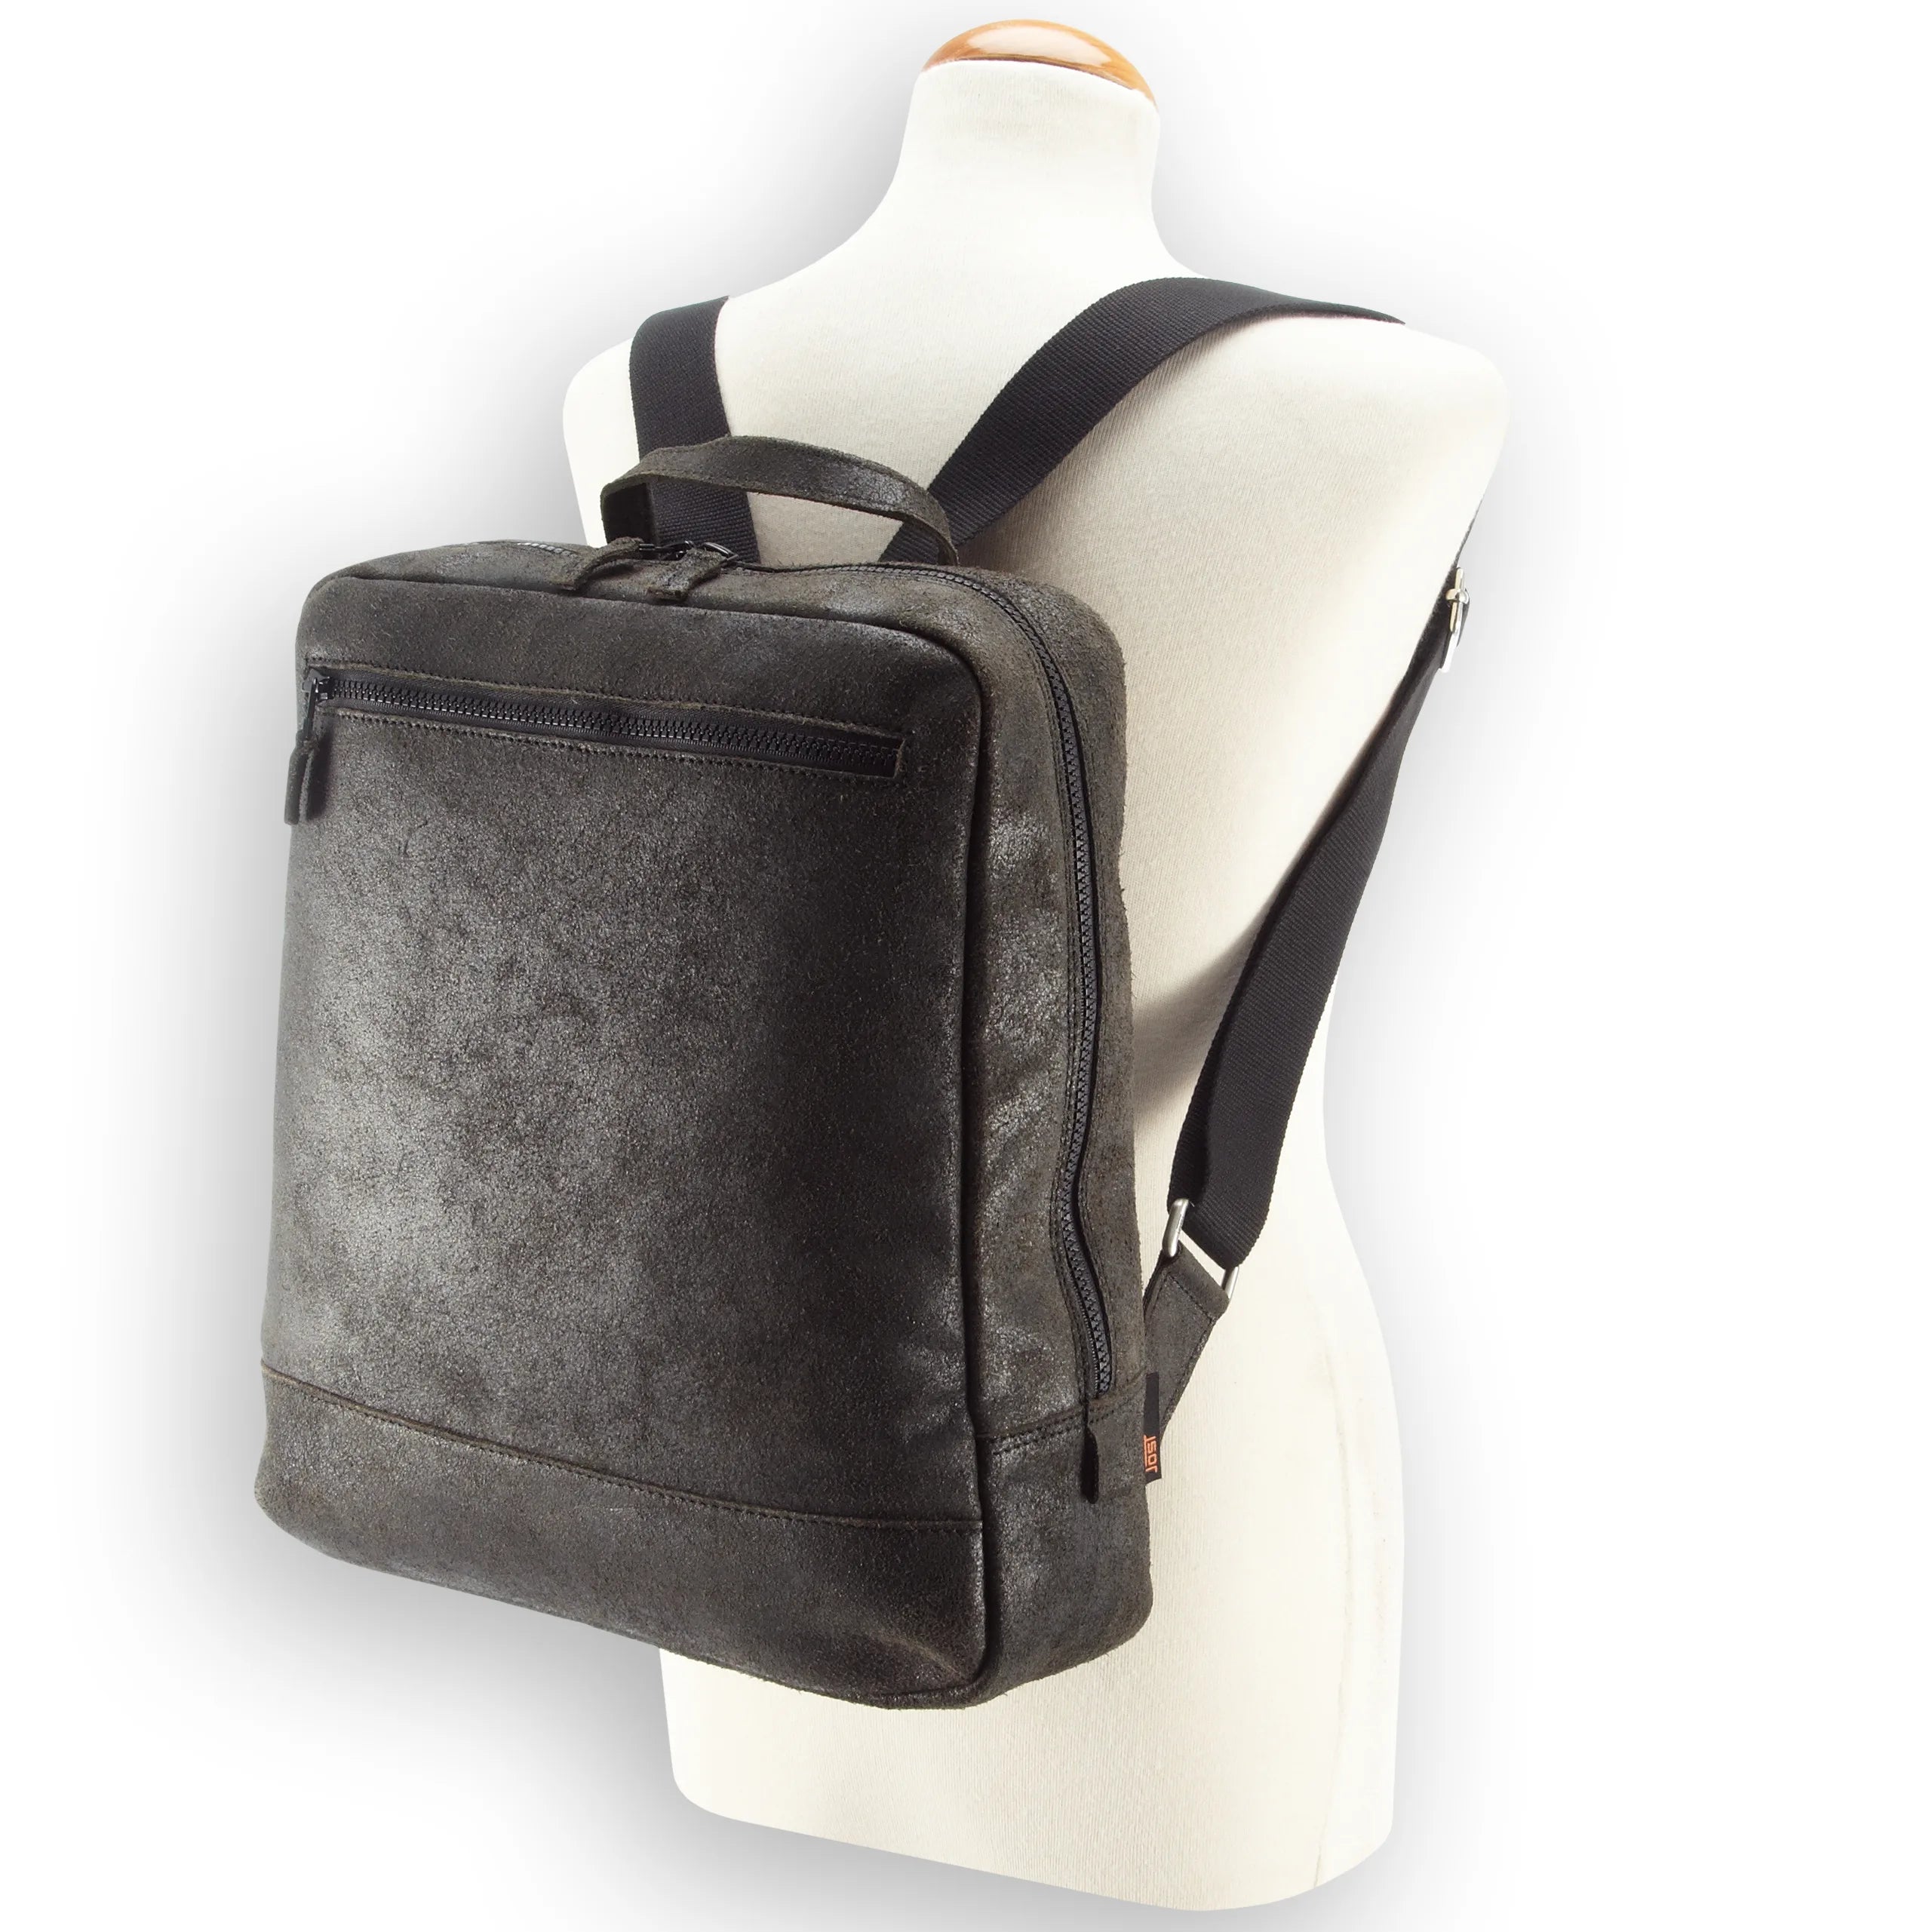 Jost Malmö backpack with laptop compartment 37 cm - black